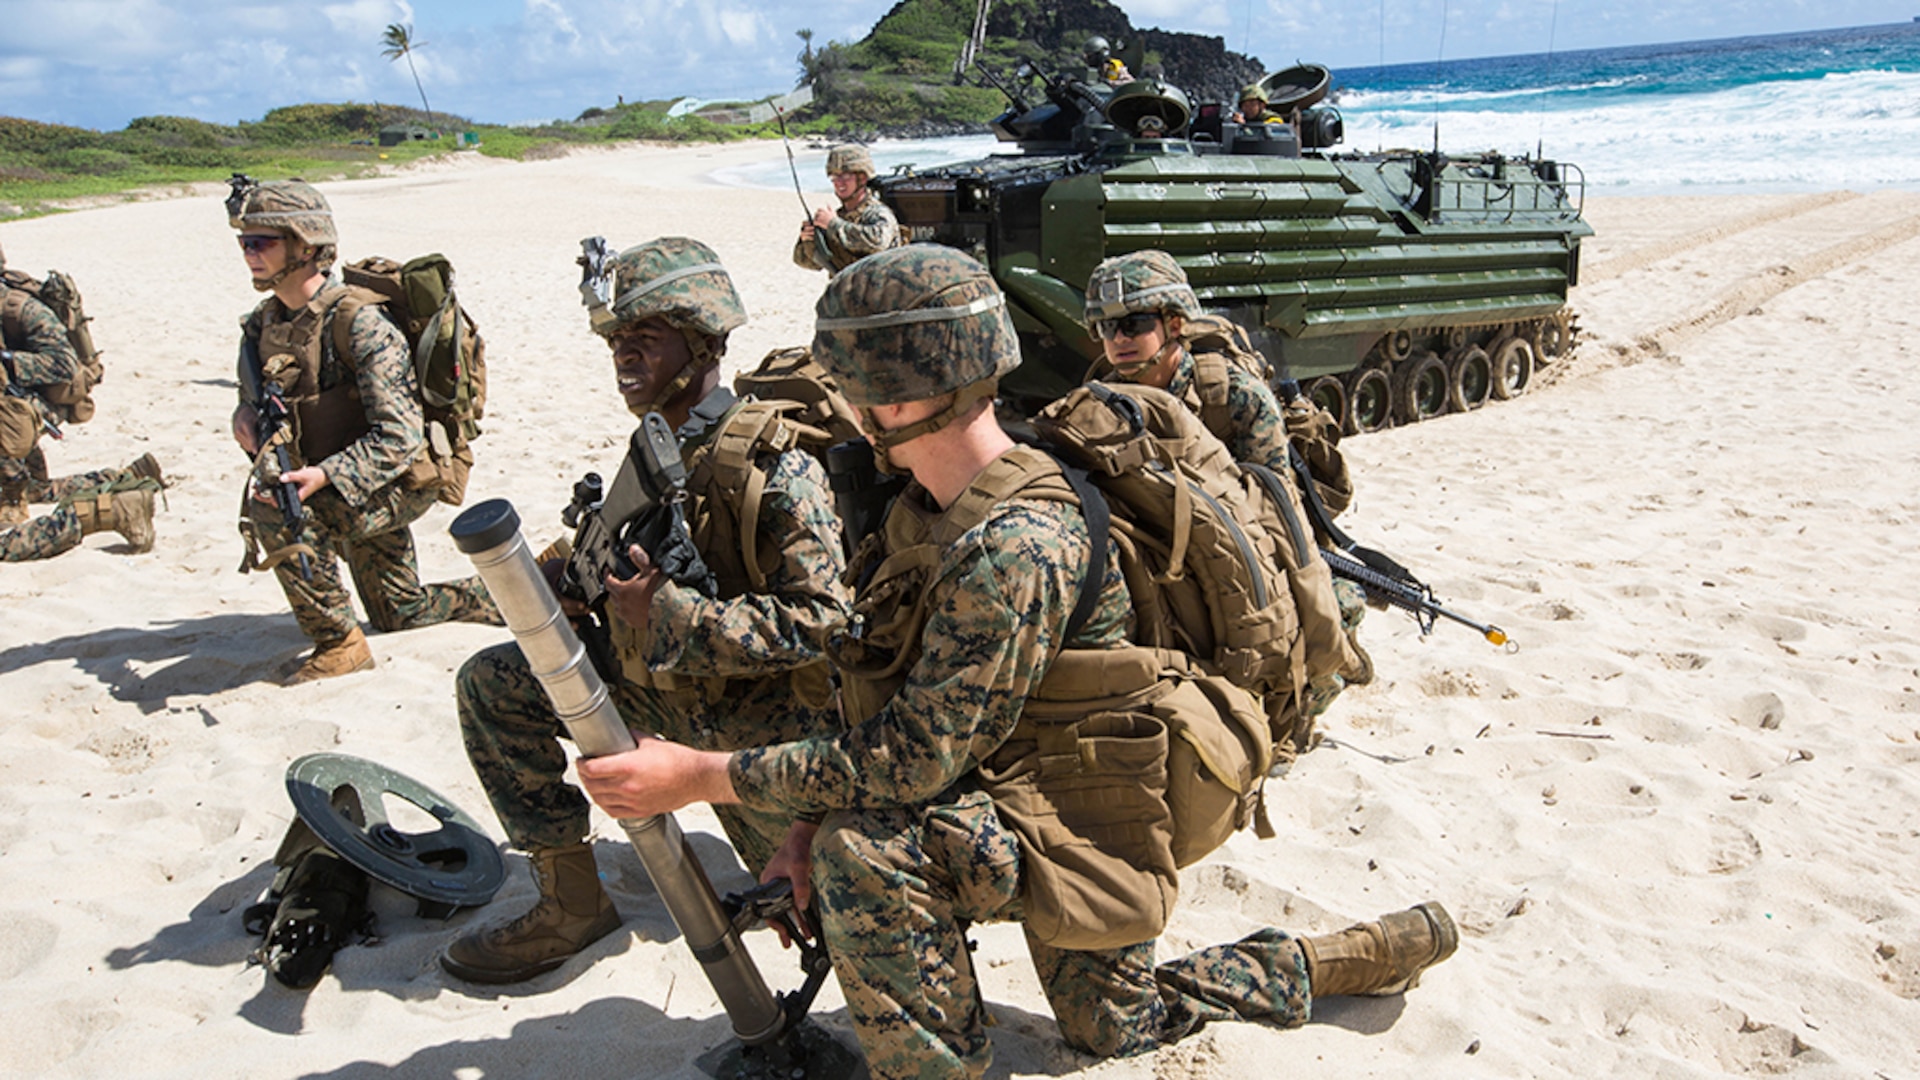 U.S. Marines with Company E, Battalion Landing Team 2nd Battalion, 3rd Marine Regiment, assault a beach during Rim of the Pacific 2016.  The assault was launched from USS San Diego and commanded by III Marine Expeditionary Force units aboard USS America. Twenty-six nations, more than 40 ships and submarines, more than 200 aircraft and 25,000 personnel are participating in RIMPAC from June 30 to Aug. 4, in and around the Hawaiian Islands and Southern California. The world's largest international maritime exercise, RIMPAC provides a unique training opportunity that helps participants foster and sustain the cooperative relationships that are critical to ensuring the safety of sea lanes and security in the world's oceans. RIMPAC 2016 is the 25th exercise in the series that began in 1971.